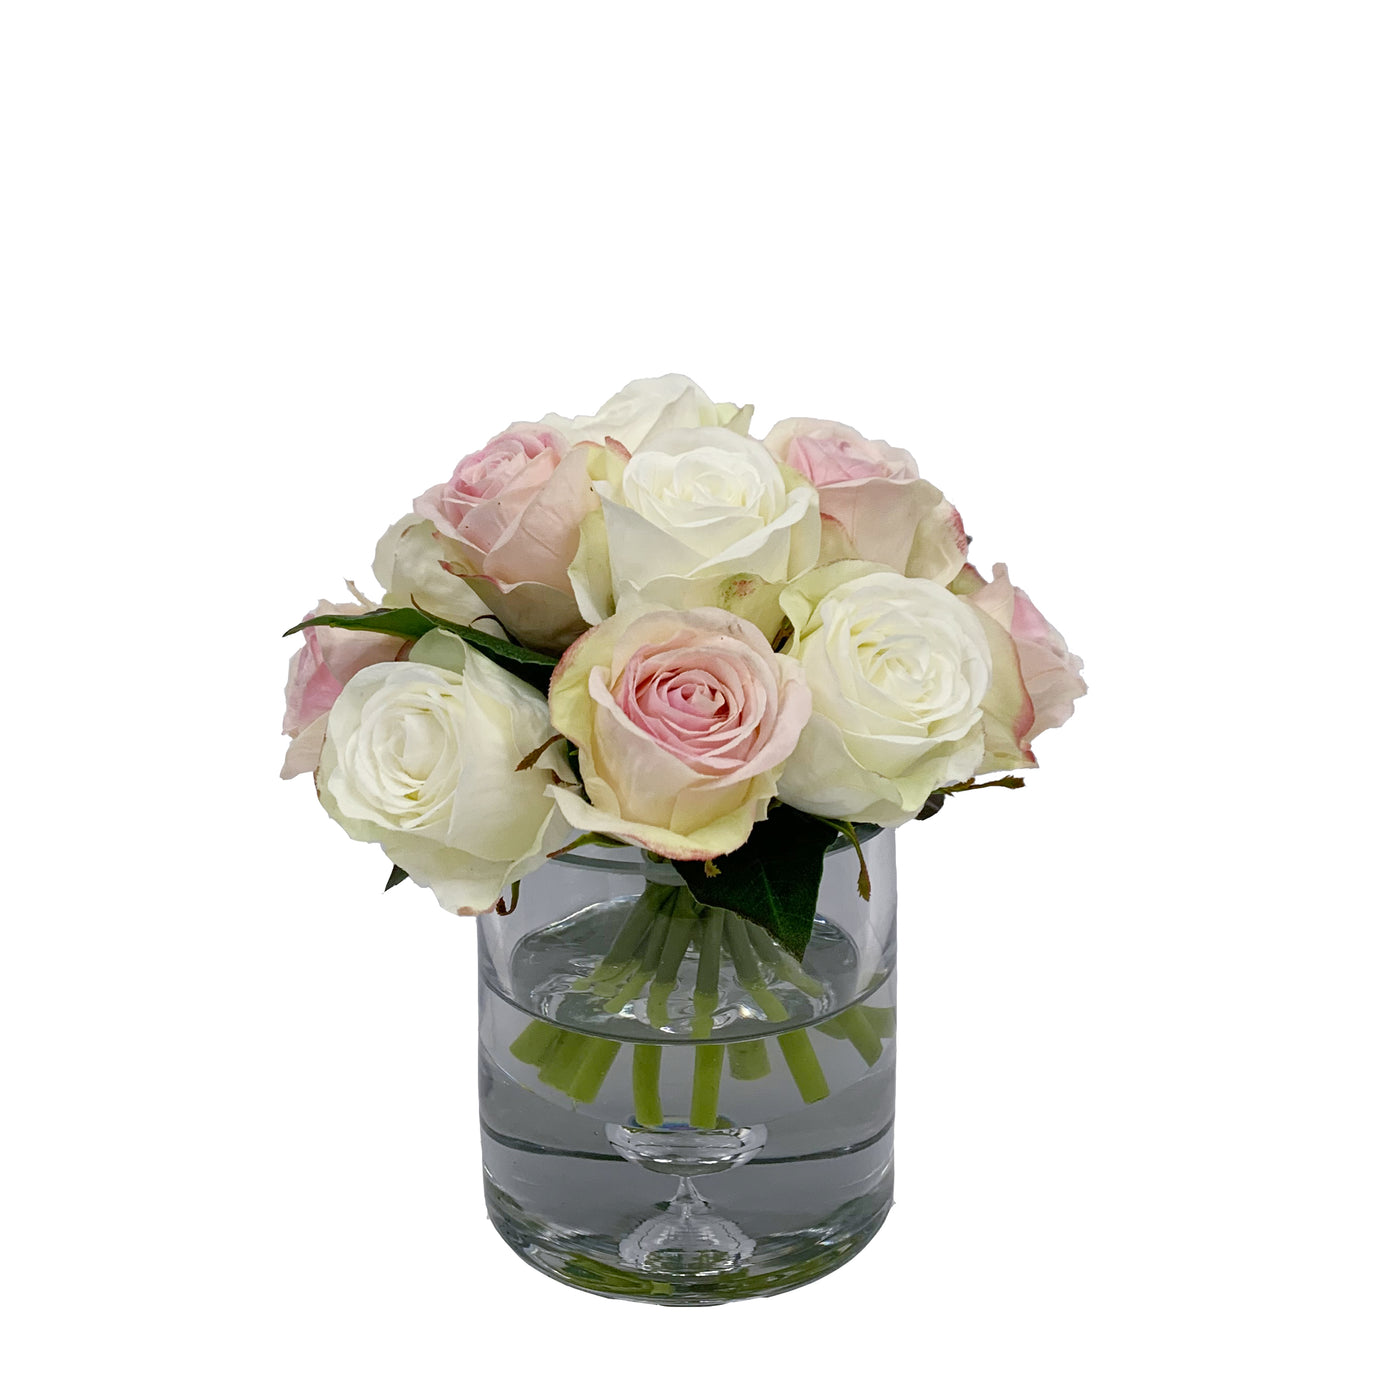 Artificial mixed colored rose bouquet in glass vase